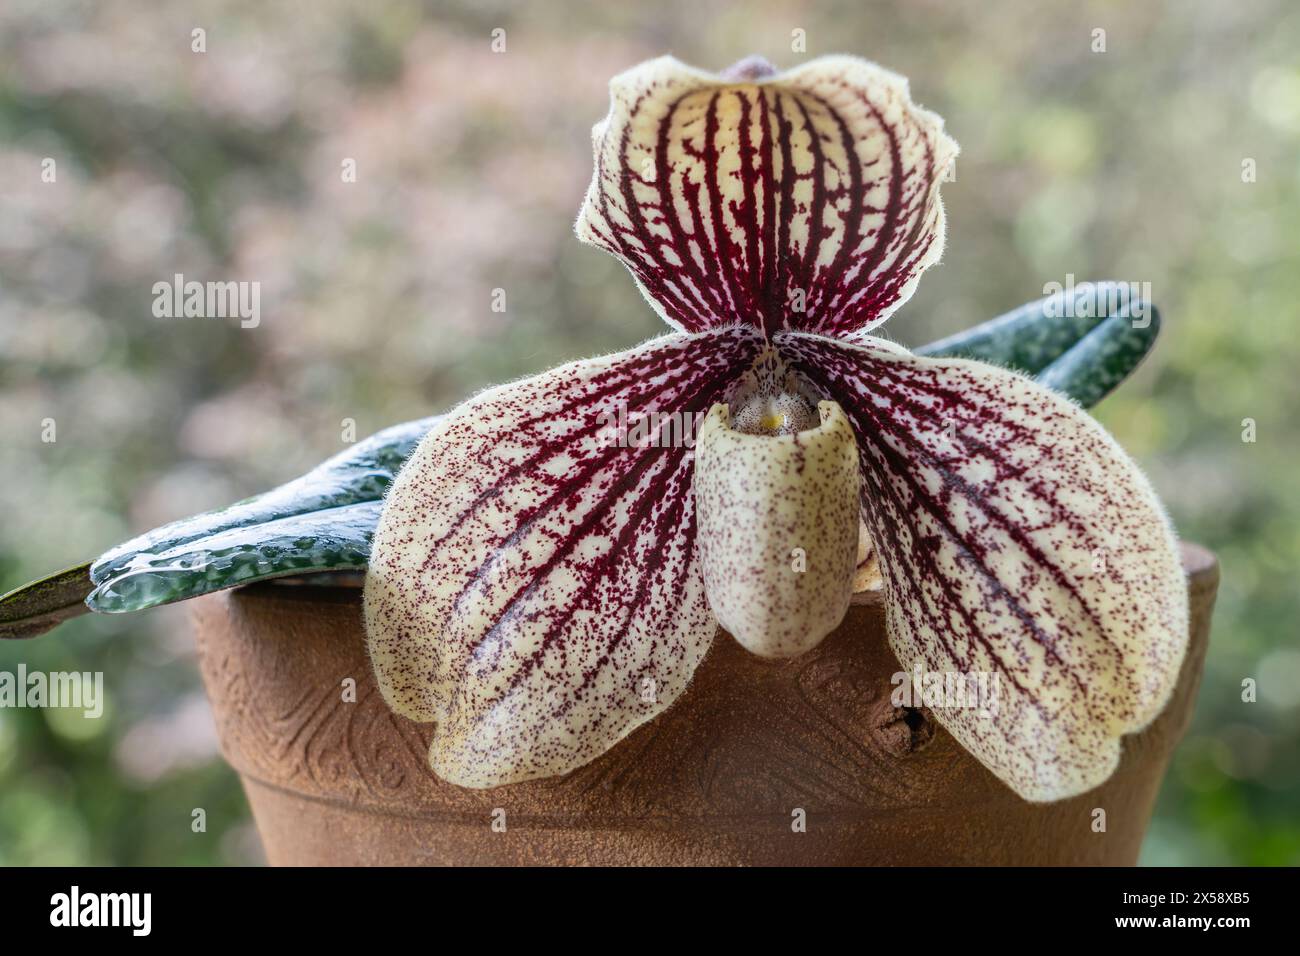 Closeup view of blooming lady slipper orchid species paphiopedilum myanmaricum with purple red and creamy white flower isolated on natural background Stock Photo